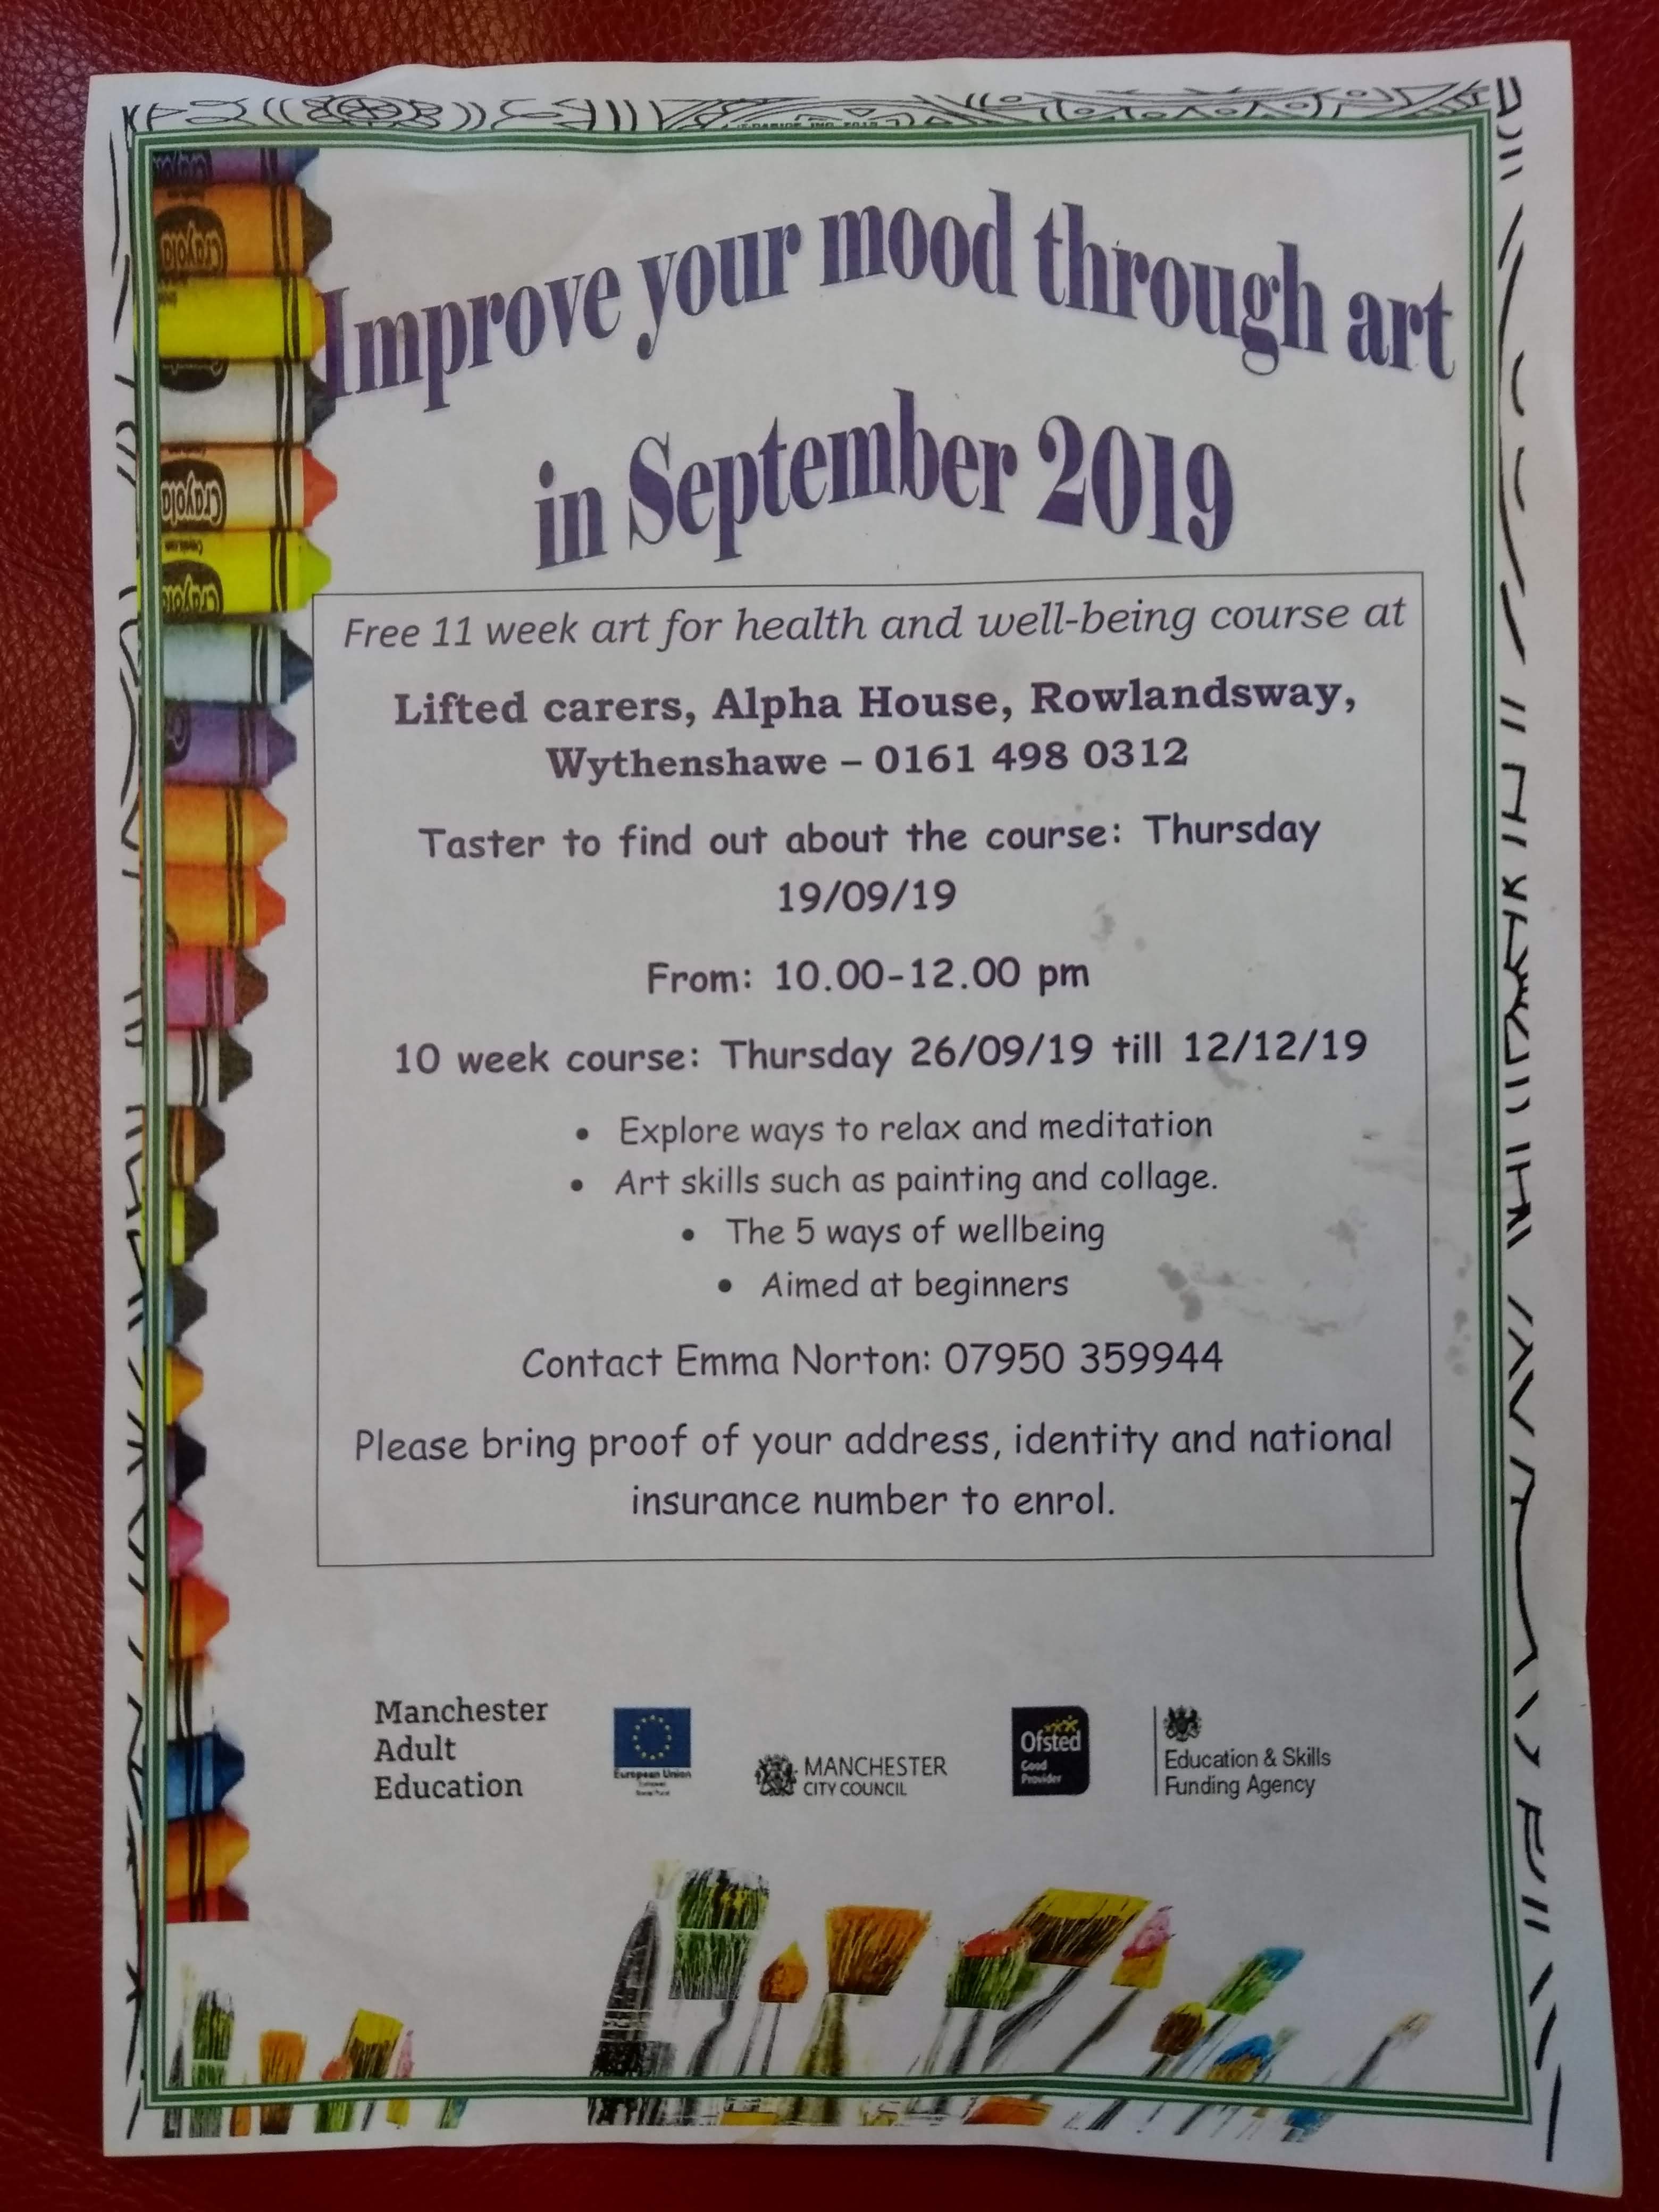 Flyer for the "Improve Your Mood Through Art" course, containing details in text plus the logos of Manchester Adult Education, European Union, Manchester City Council, Ofsted, Education & Skills Funding Agency